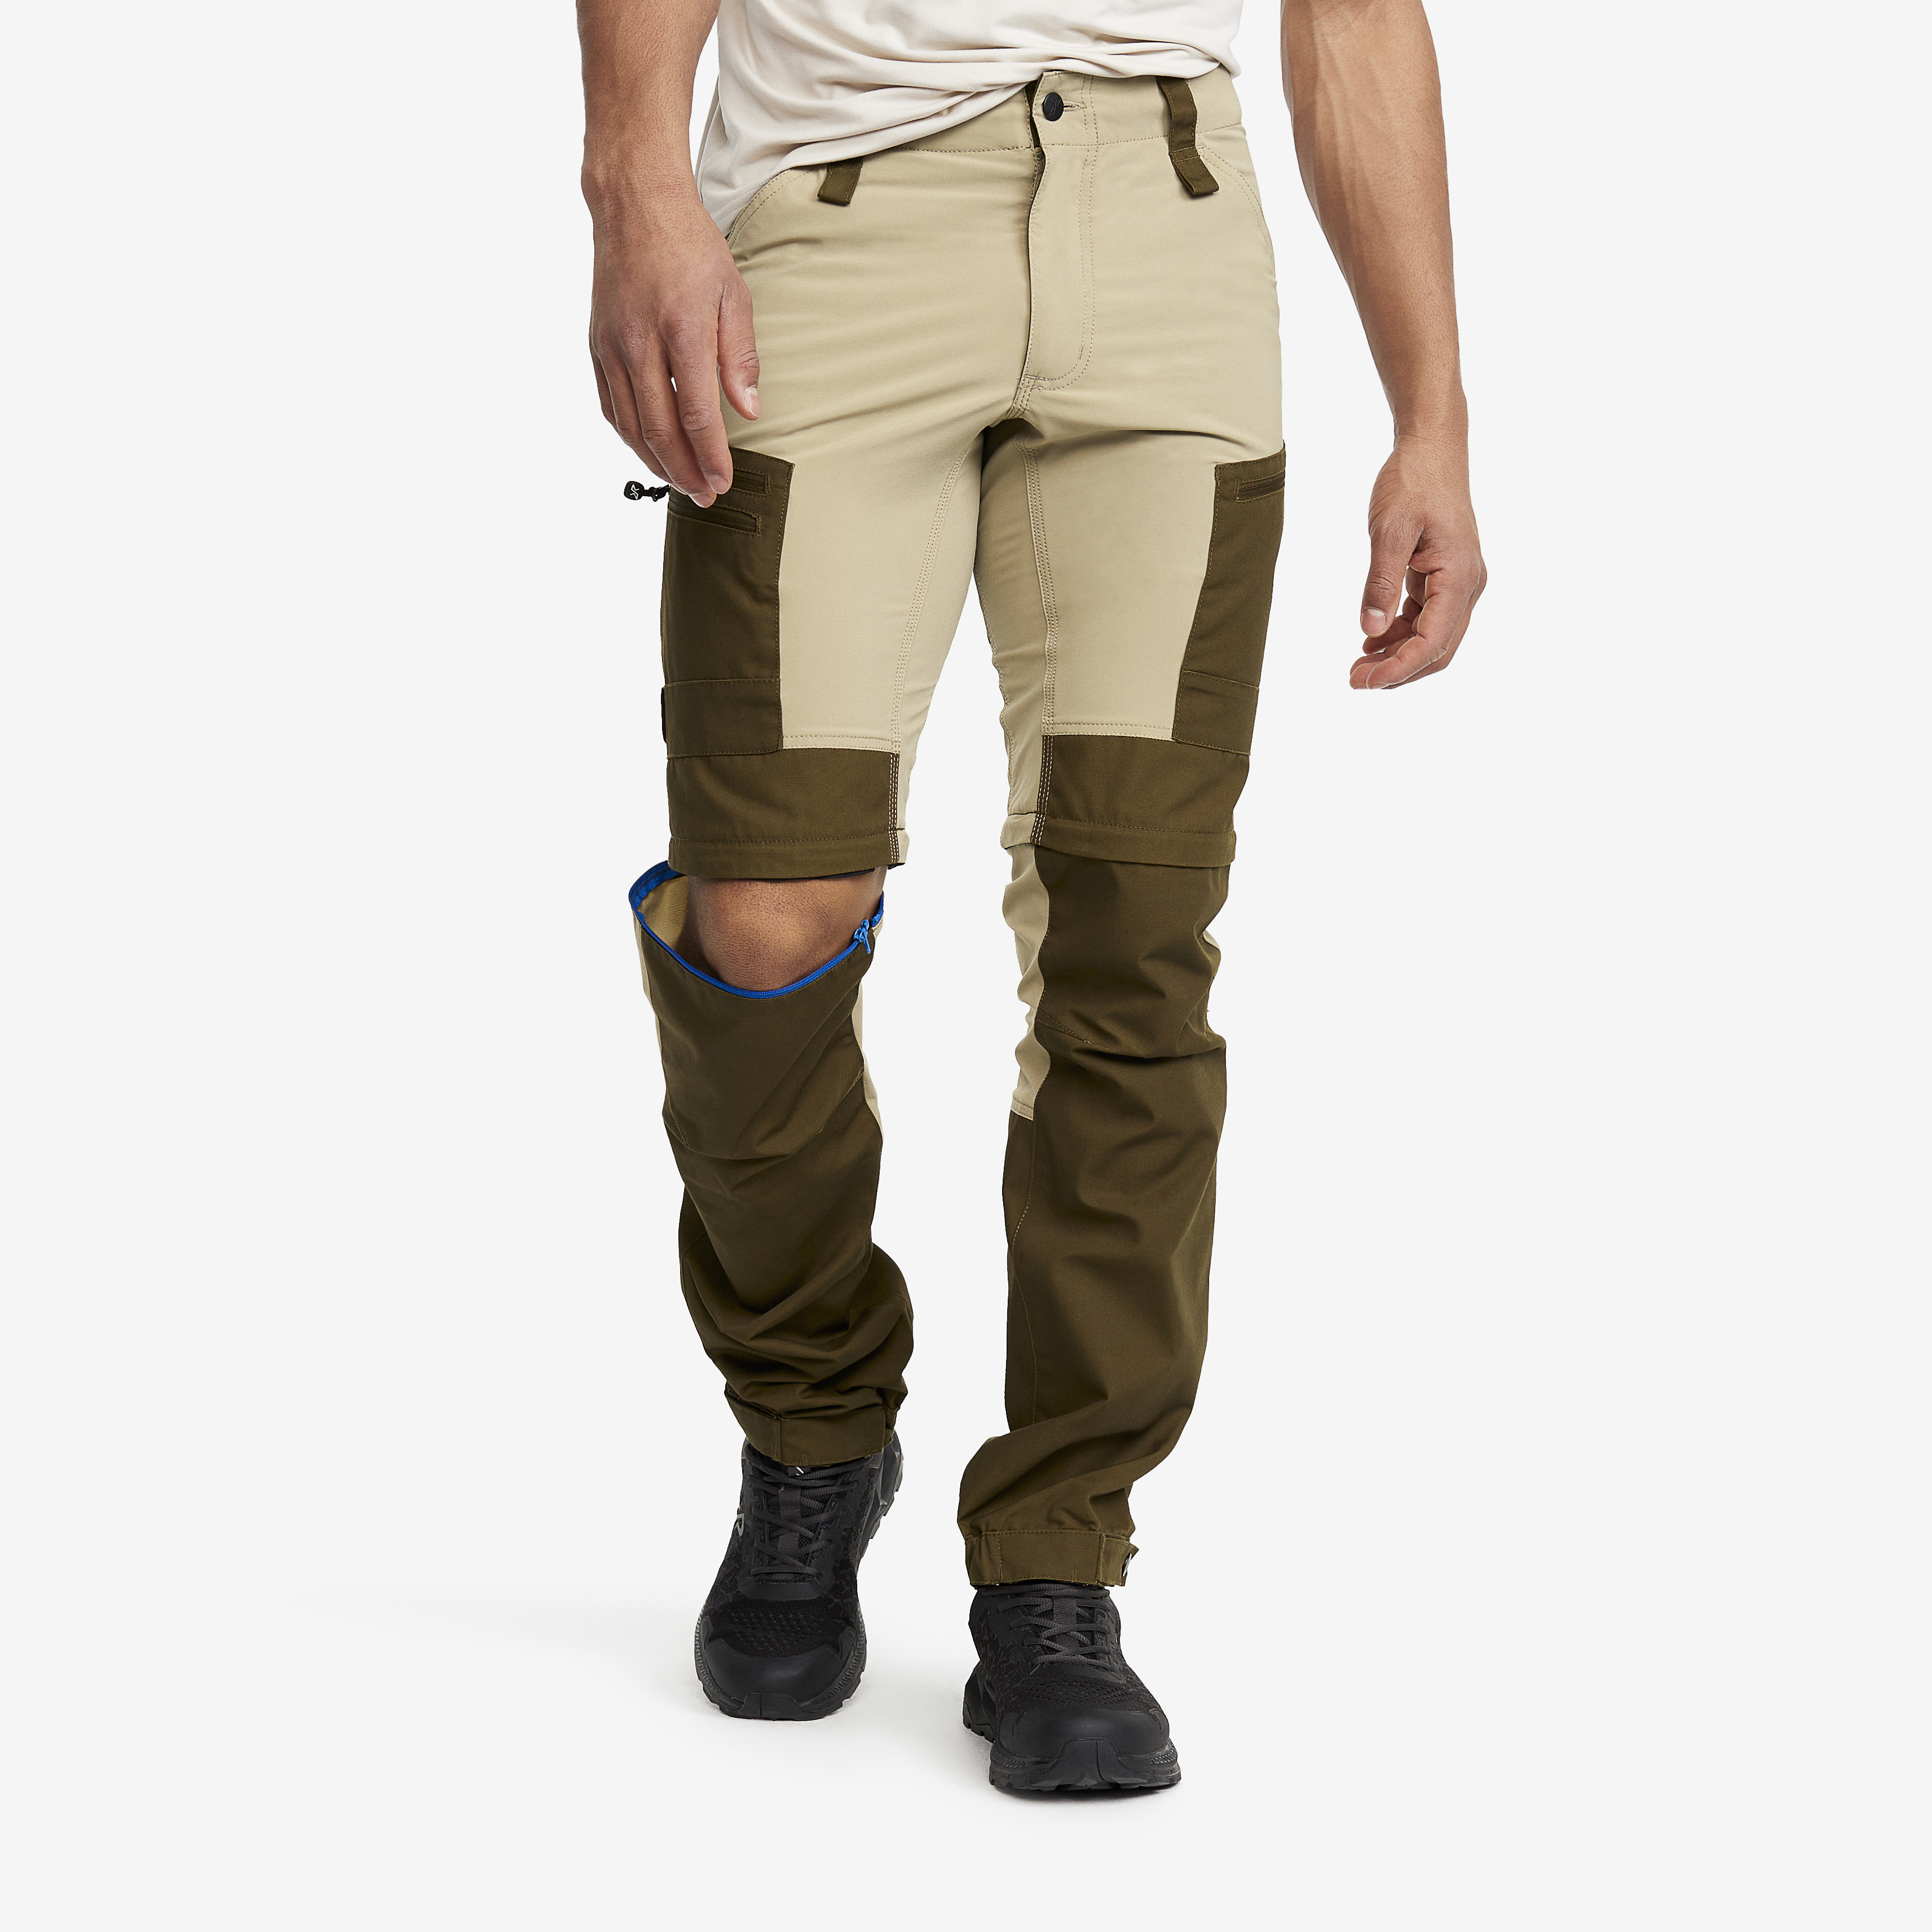 Only  Sons slim fit cargo trouser in beige  ASOS